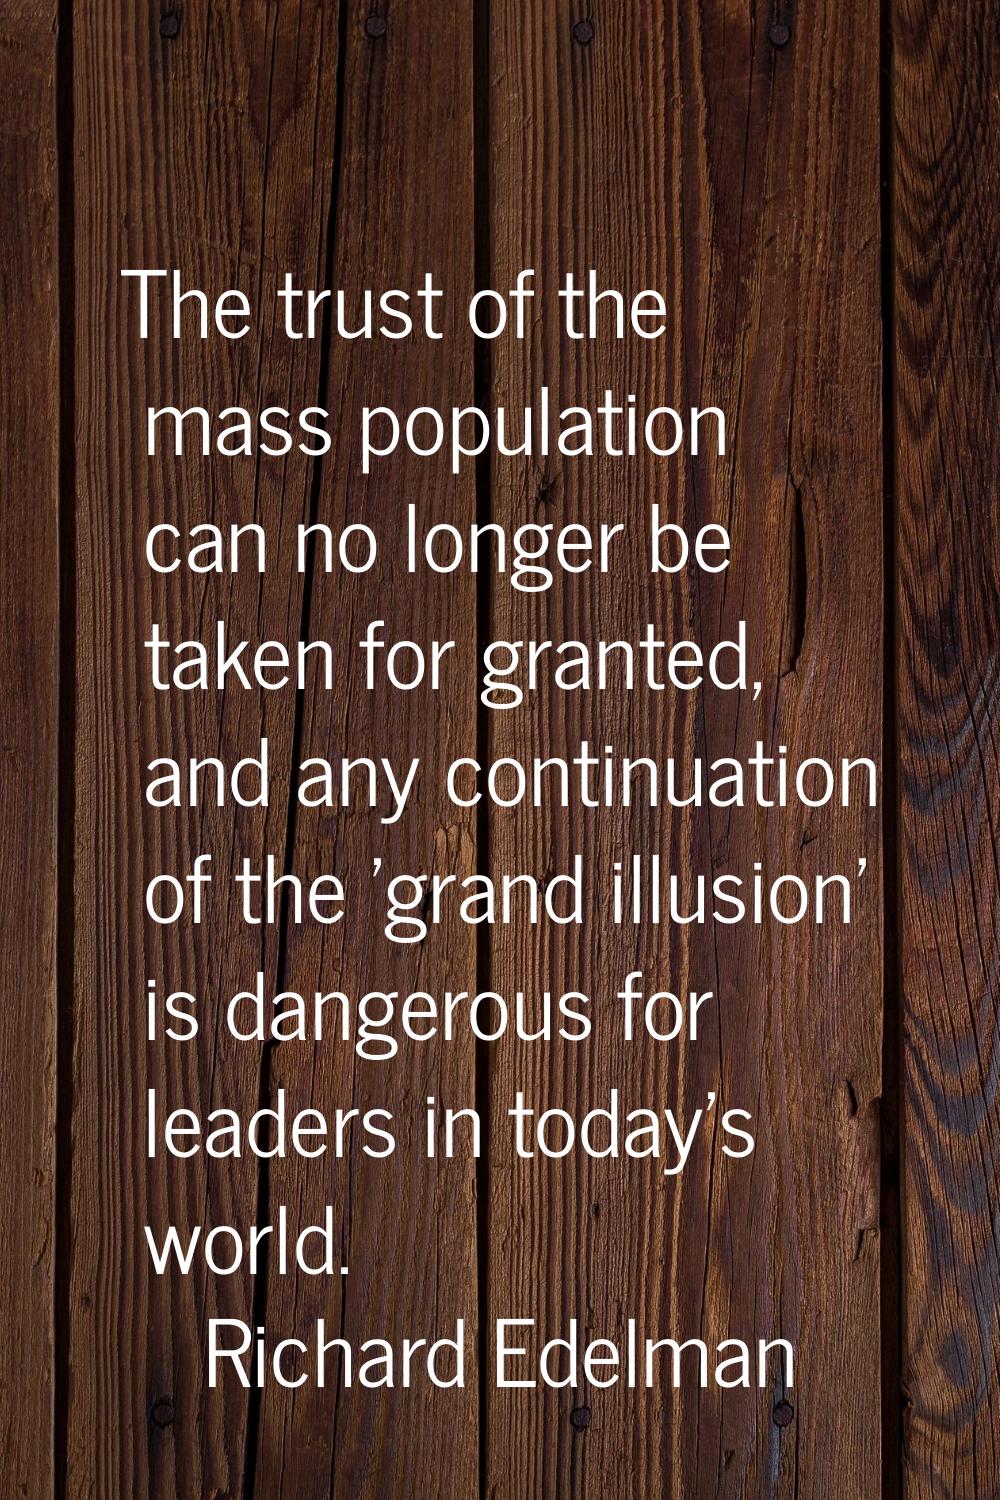 The trust of the mass population can no longer be taken for granted, and any continuation of the 'g